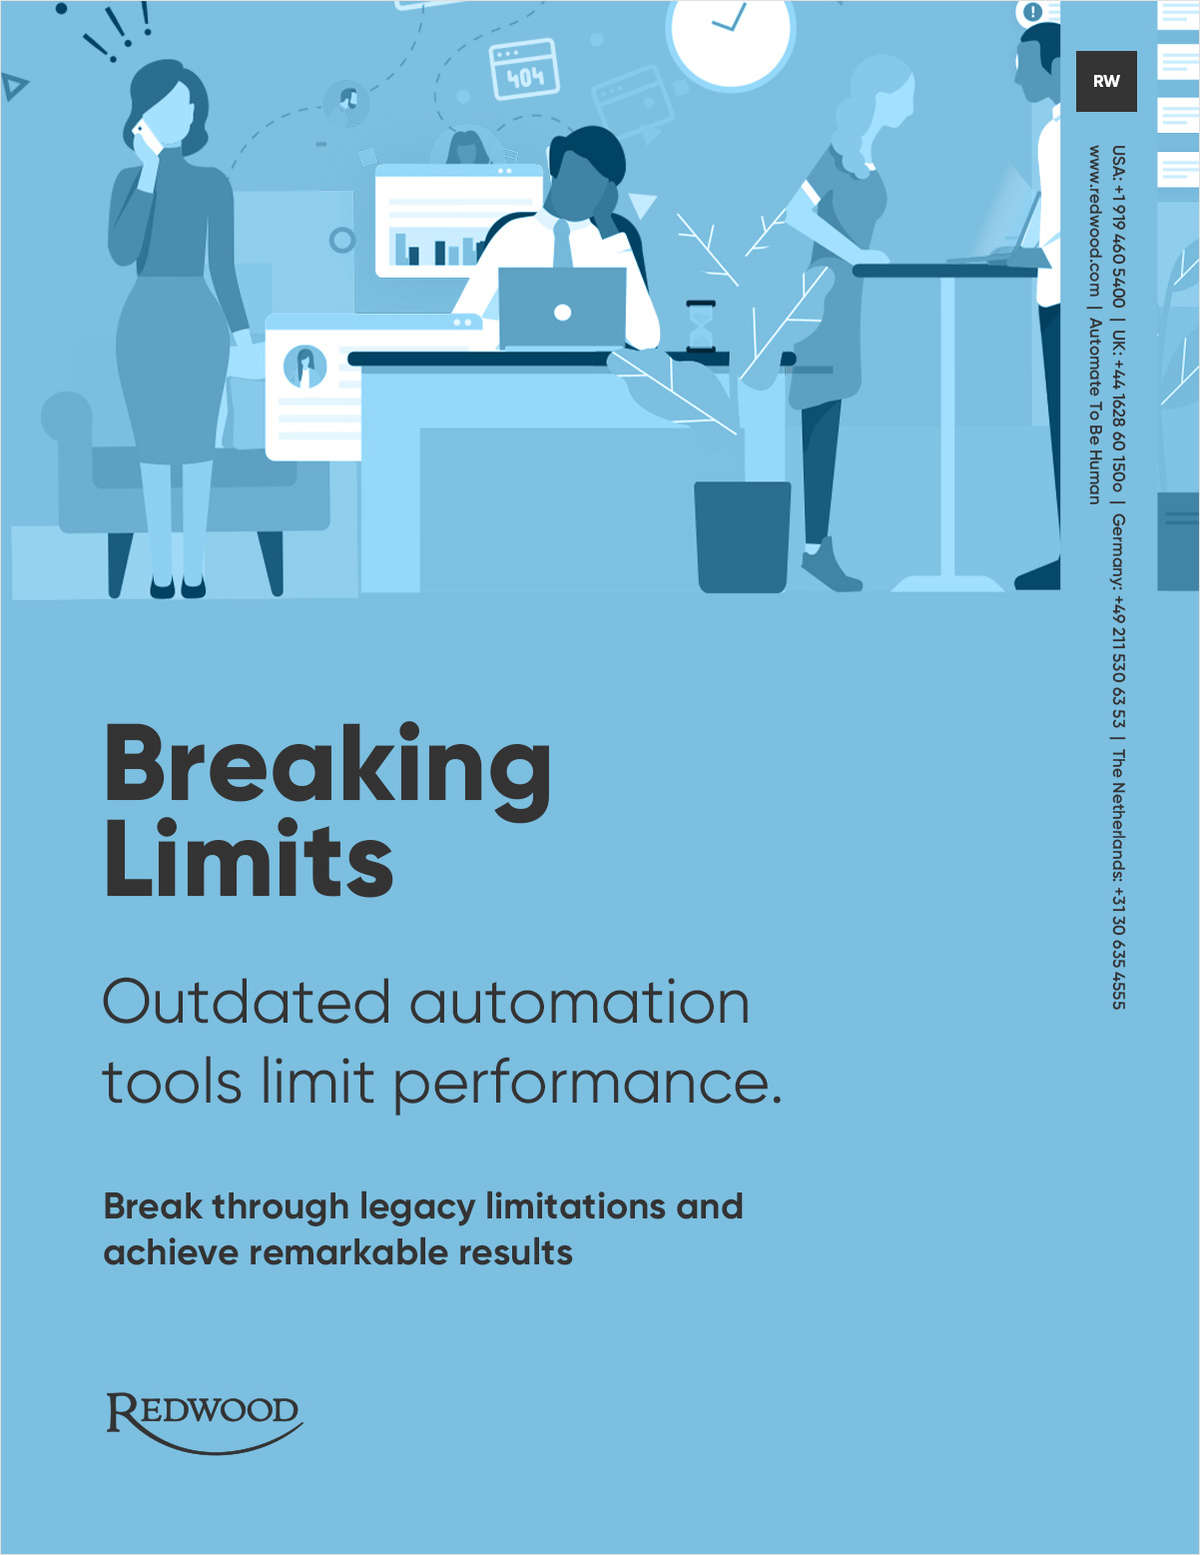 How to Break Through Legacy Automation Limits